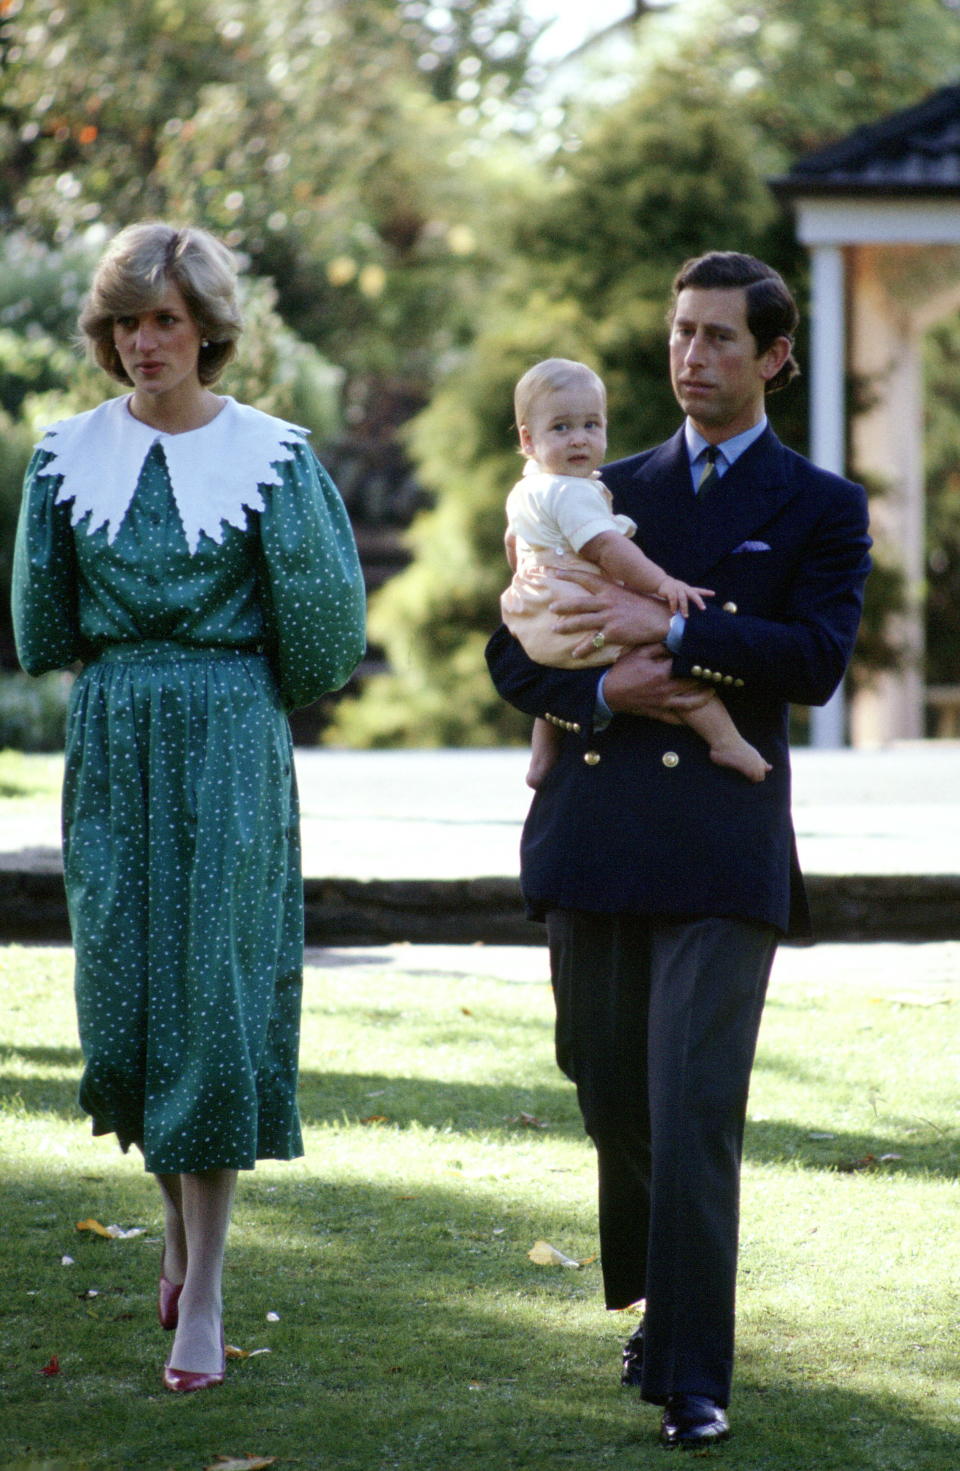 NEW ZEALAND - APRIL 18:  Prince Charles And Princess Diana With Their Baby Son, Prince William, At A Photocall During Their Official Tour Of New Zealand.  (Photo by Tim Graham Photo Library via Getty Images)